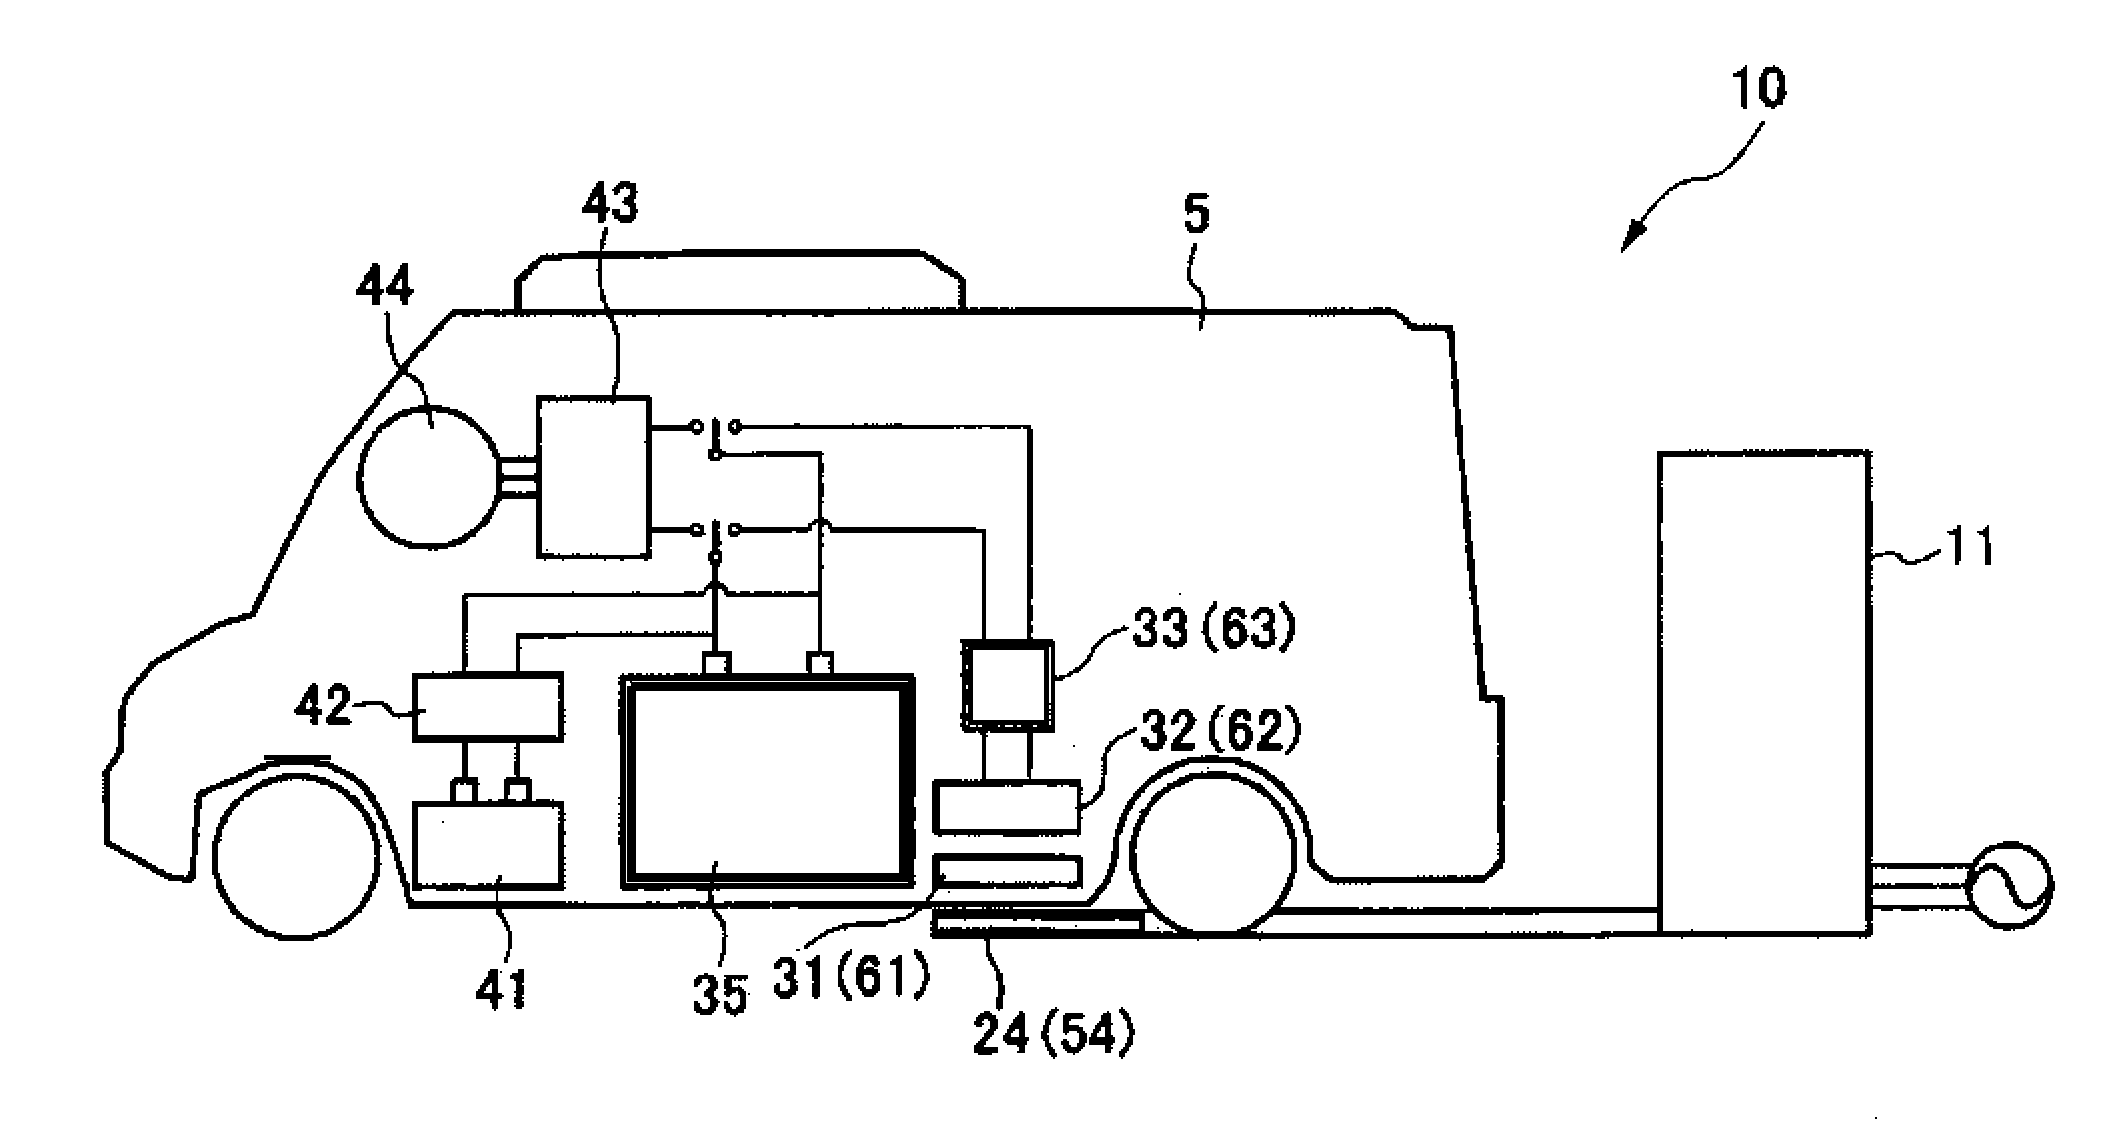 Wireless charging system for vehicle